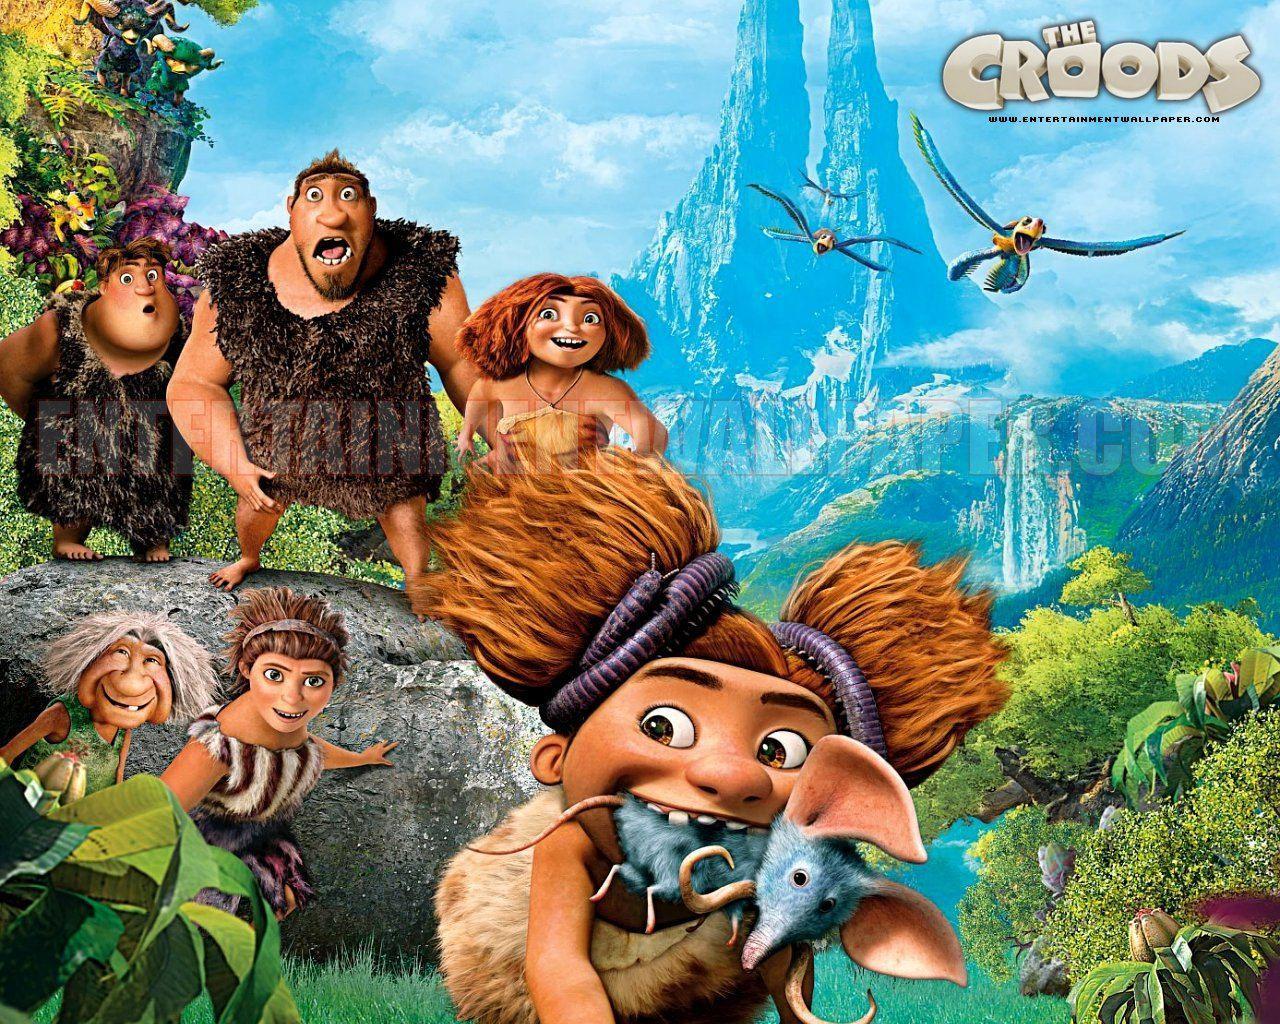 The Croods Photo Croods Image: Ravepad place to rave